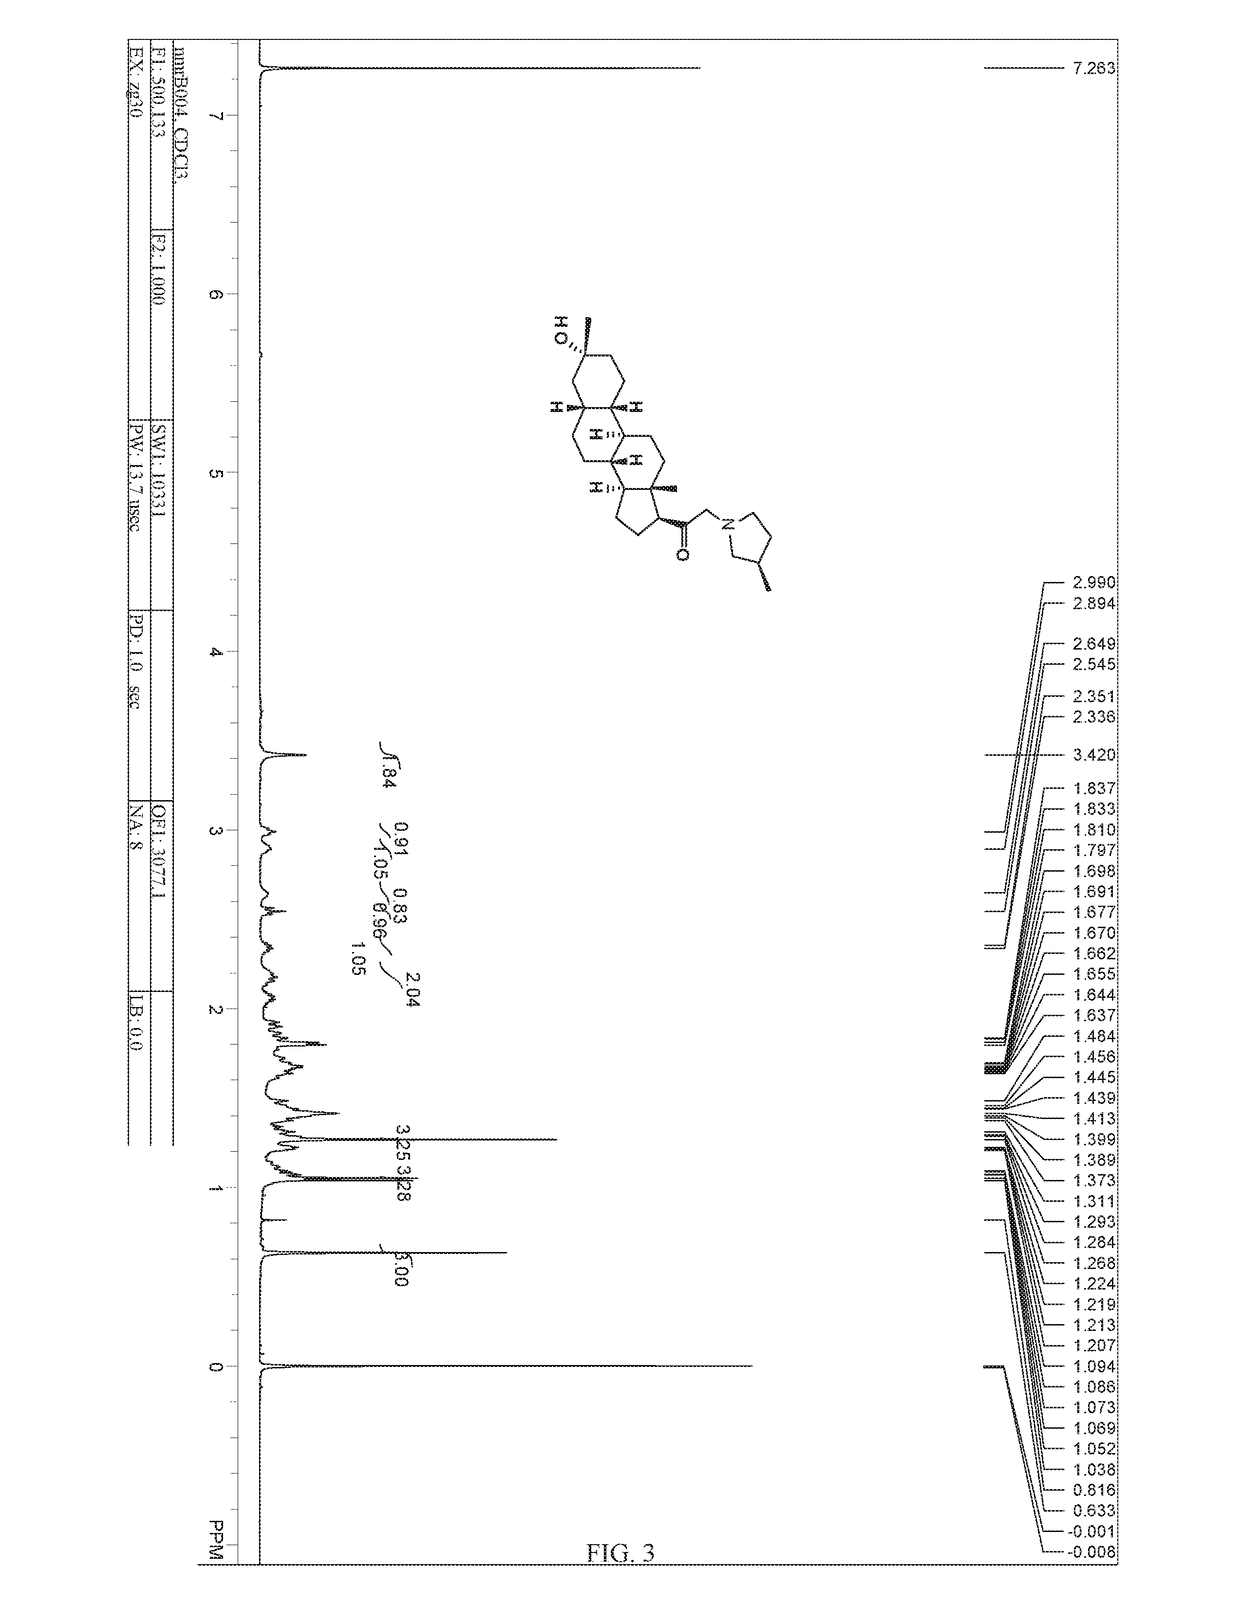 19-nor neuroactive steroids and methods of use thereof